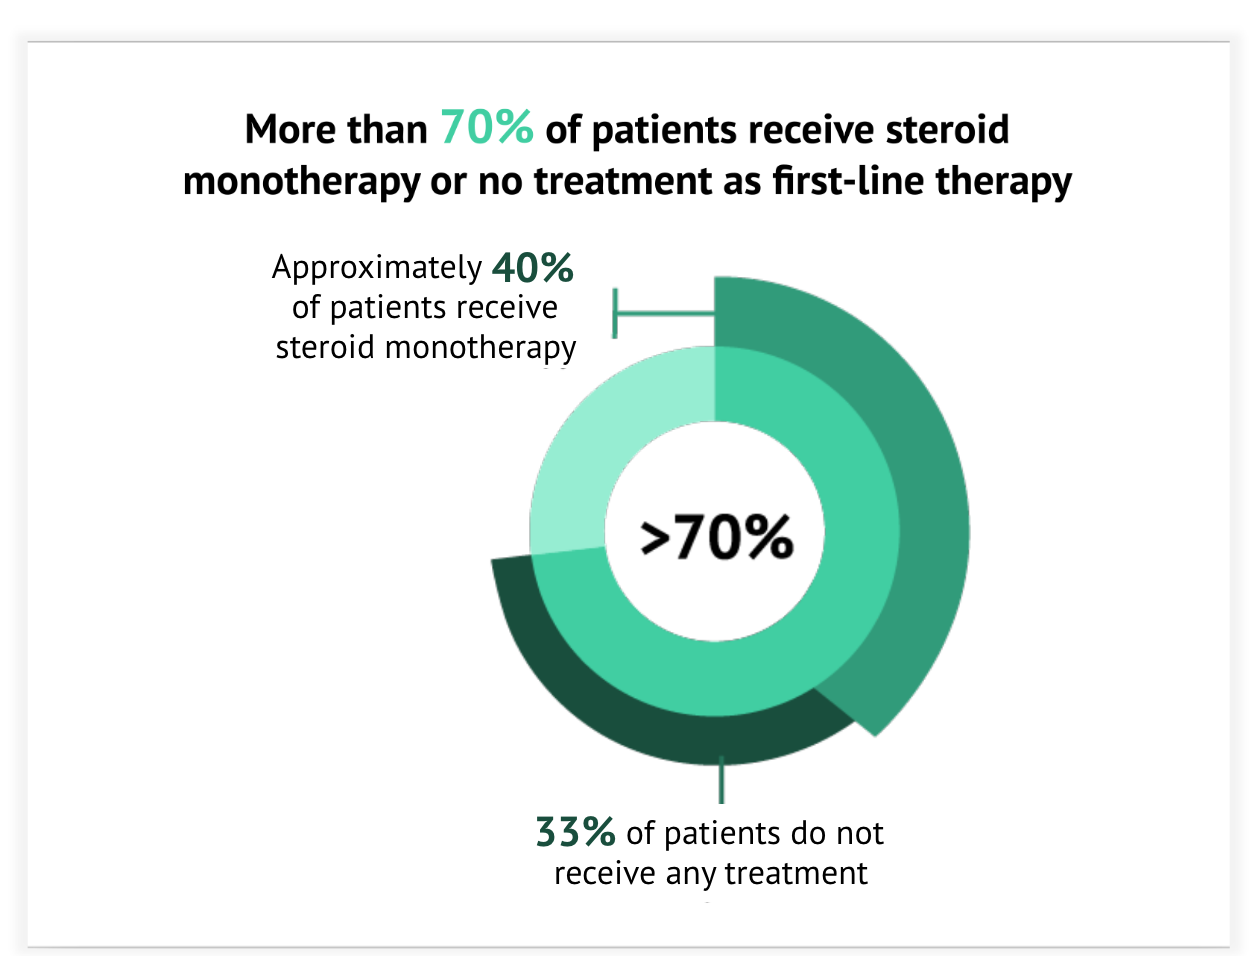 More than 70% of patients receive steroid monotherapy